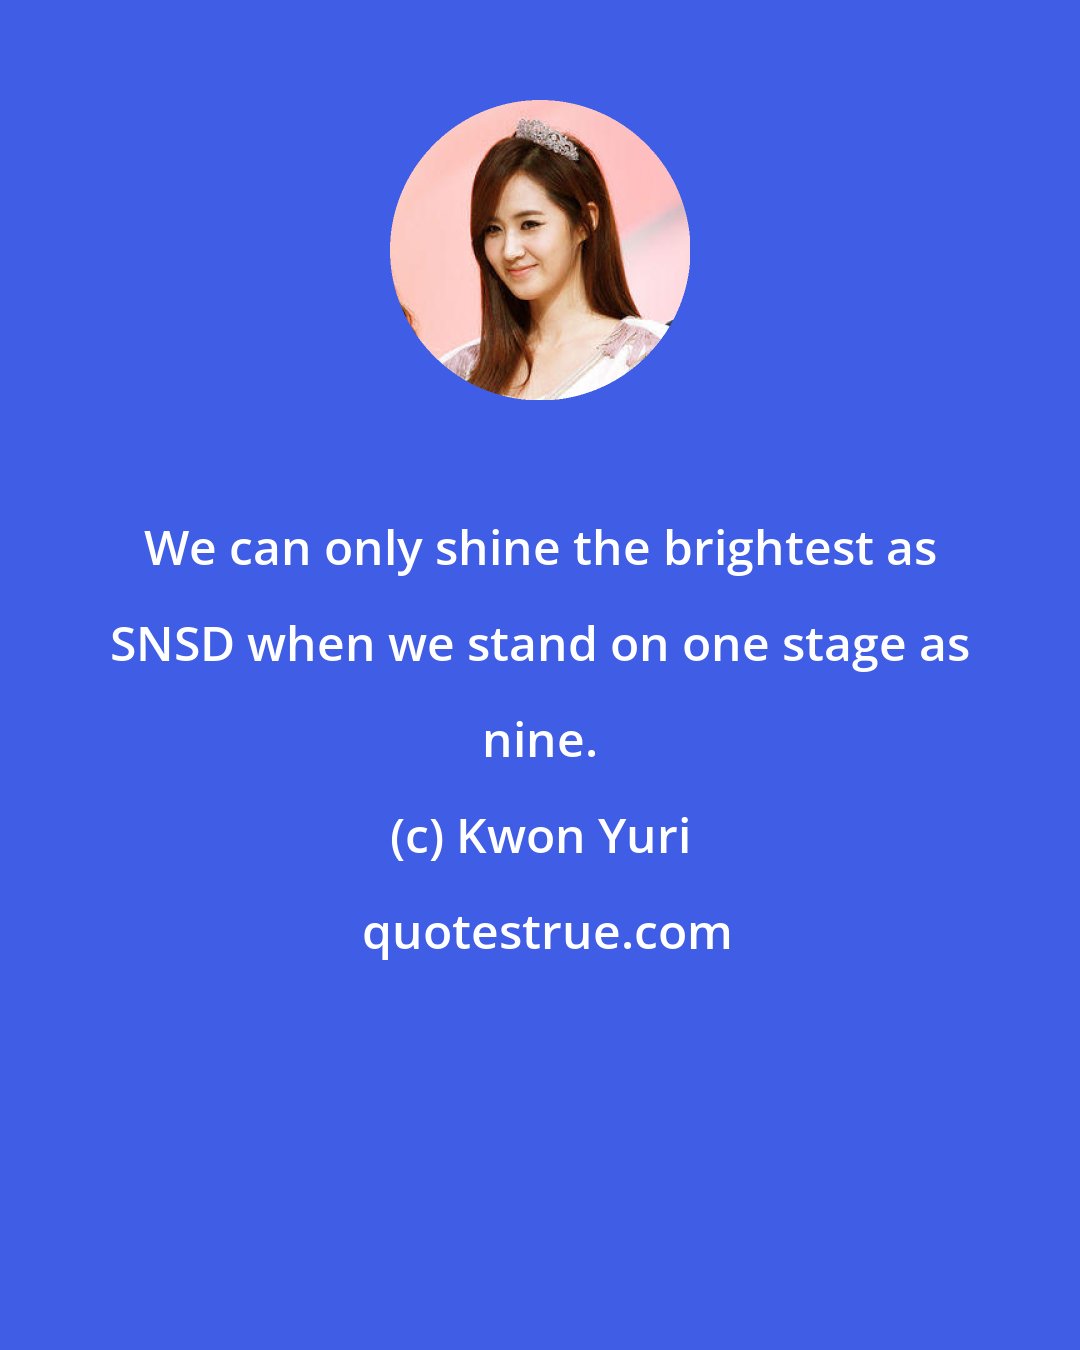 Kwon Yuri: We can only shine the brightest as SNSD when we stand on one stage as nine.